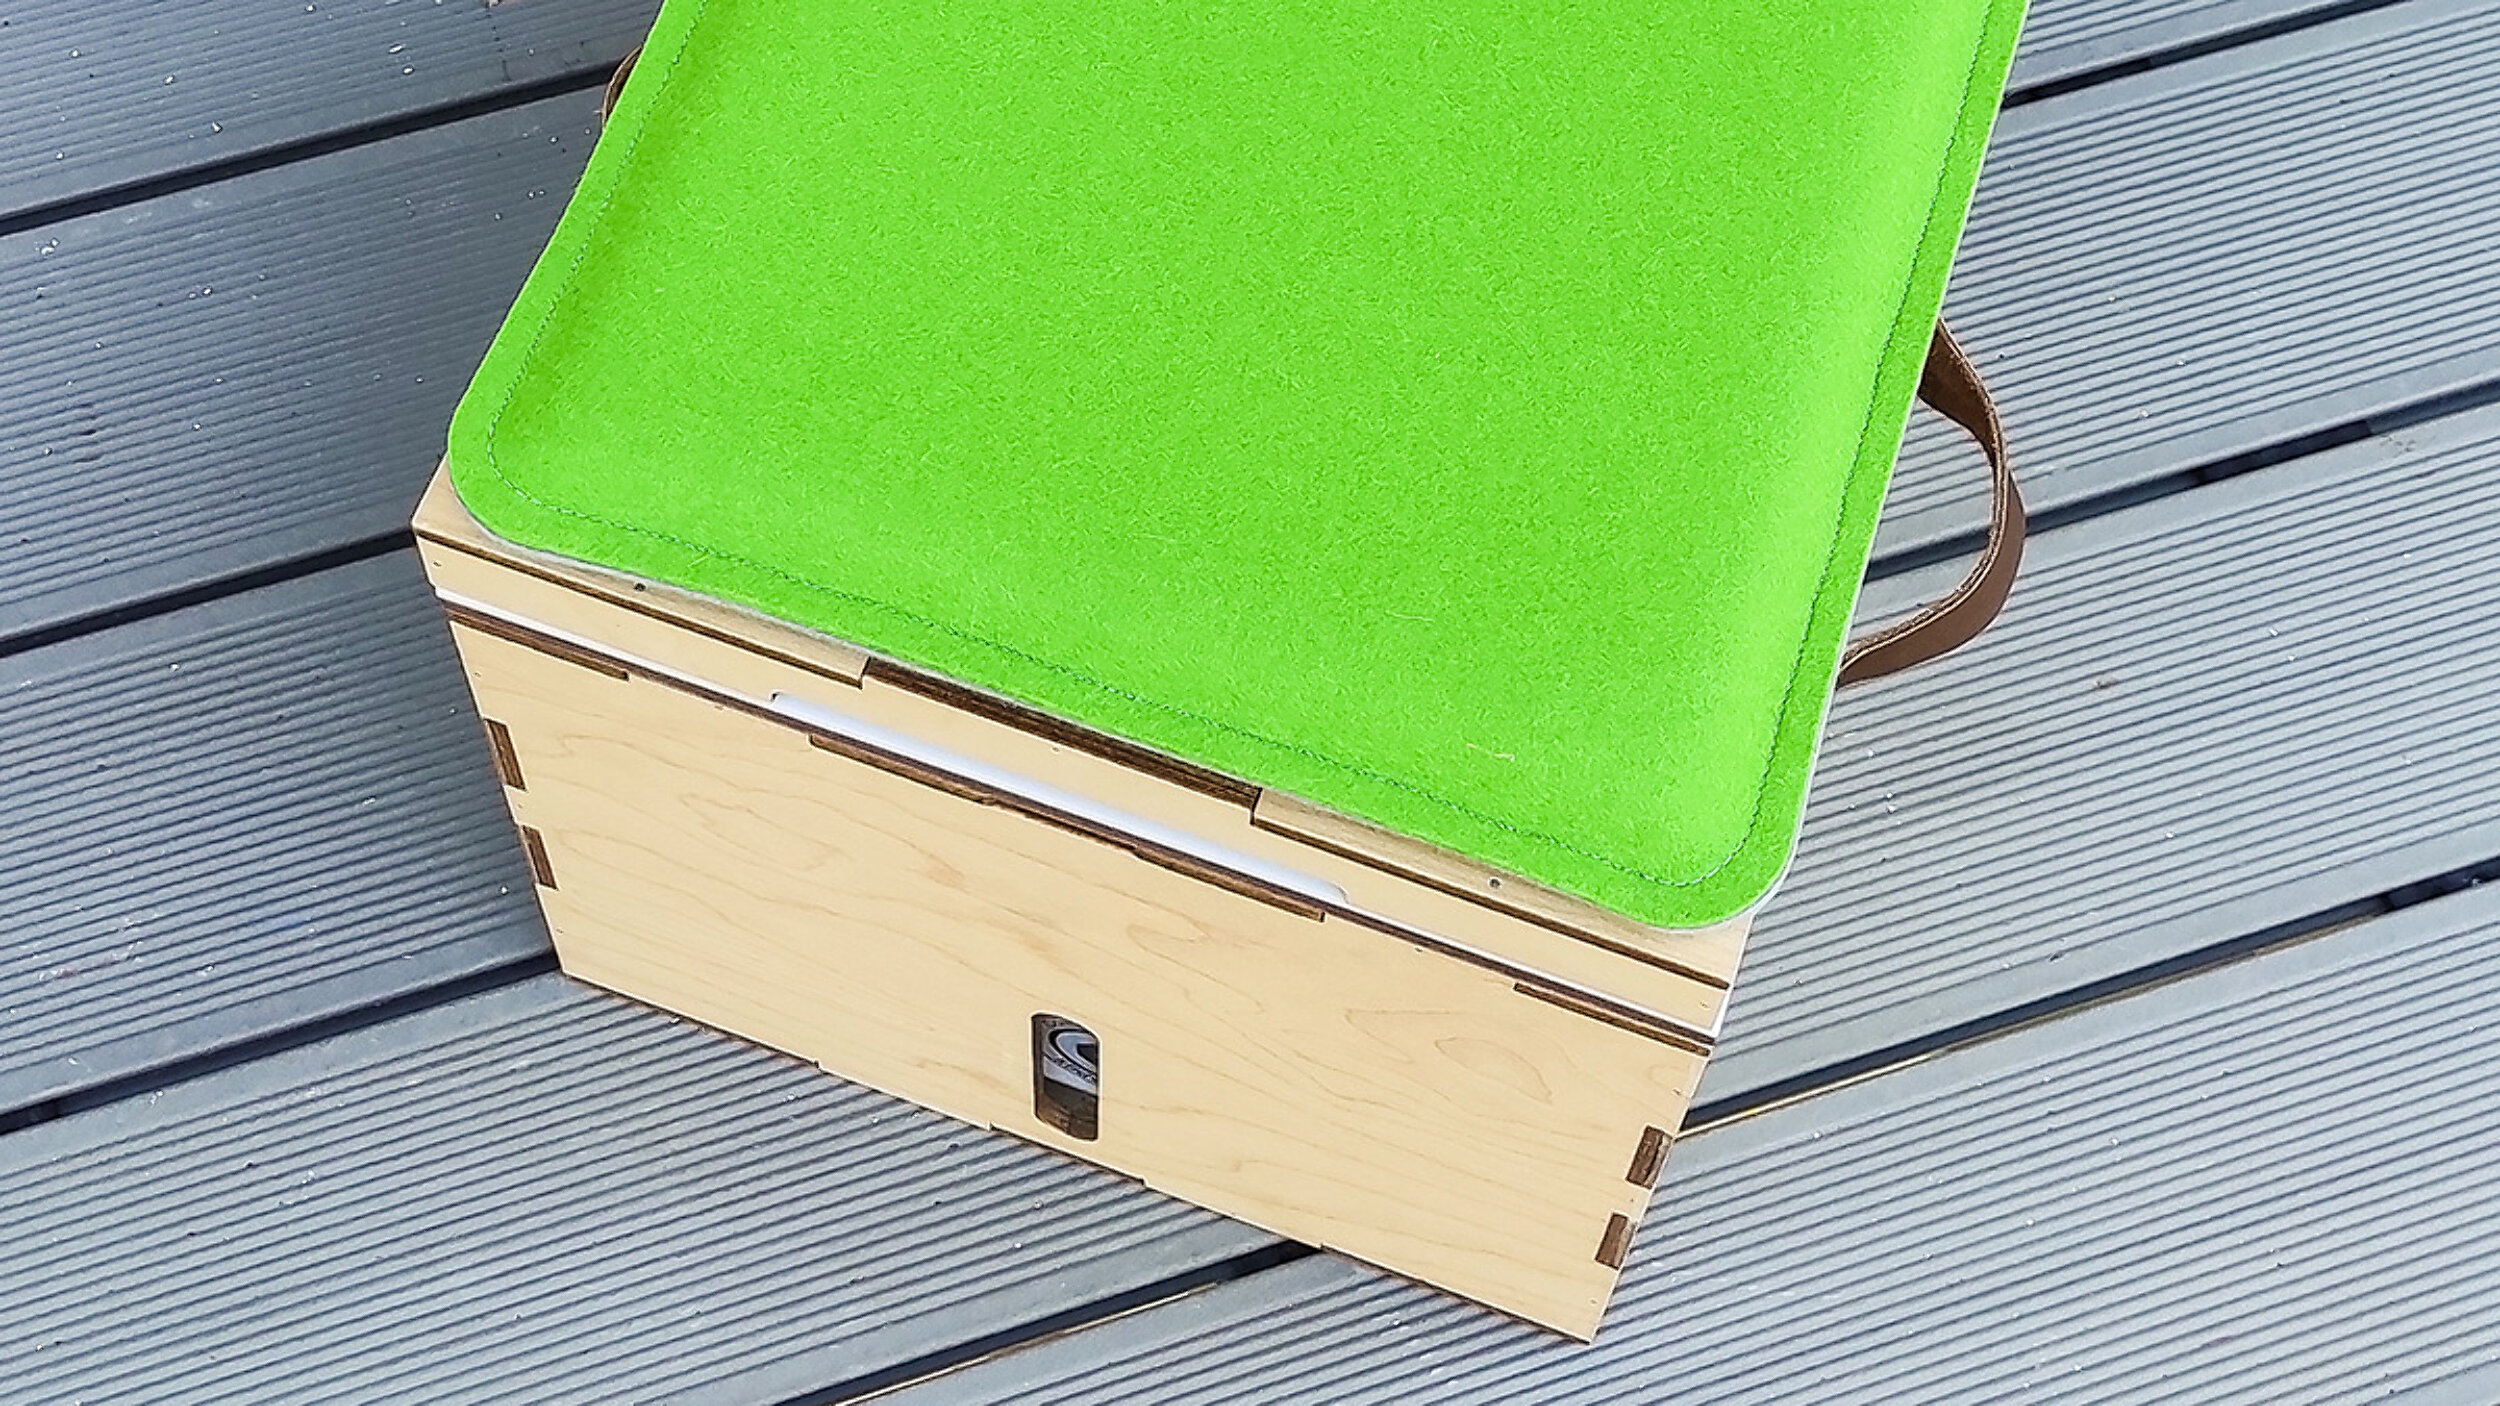 Our seat cushion in the color combination green & gray fits perfectly on your MiniLoo dry composting toilet